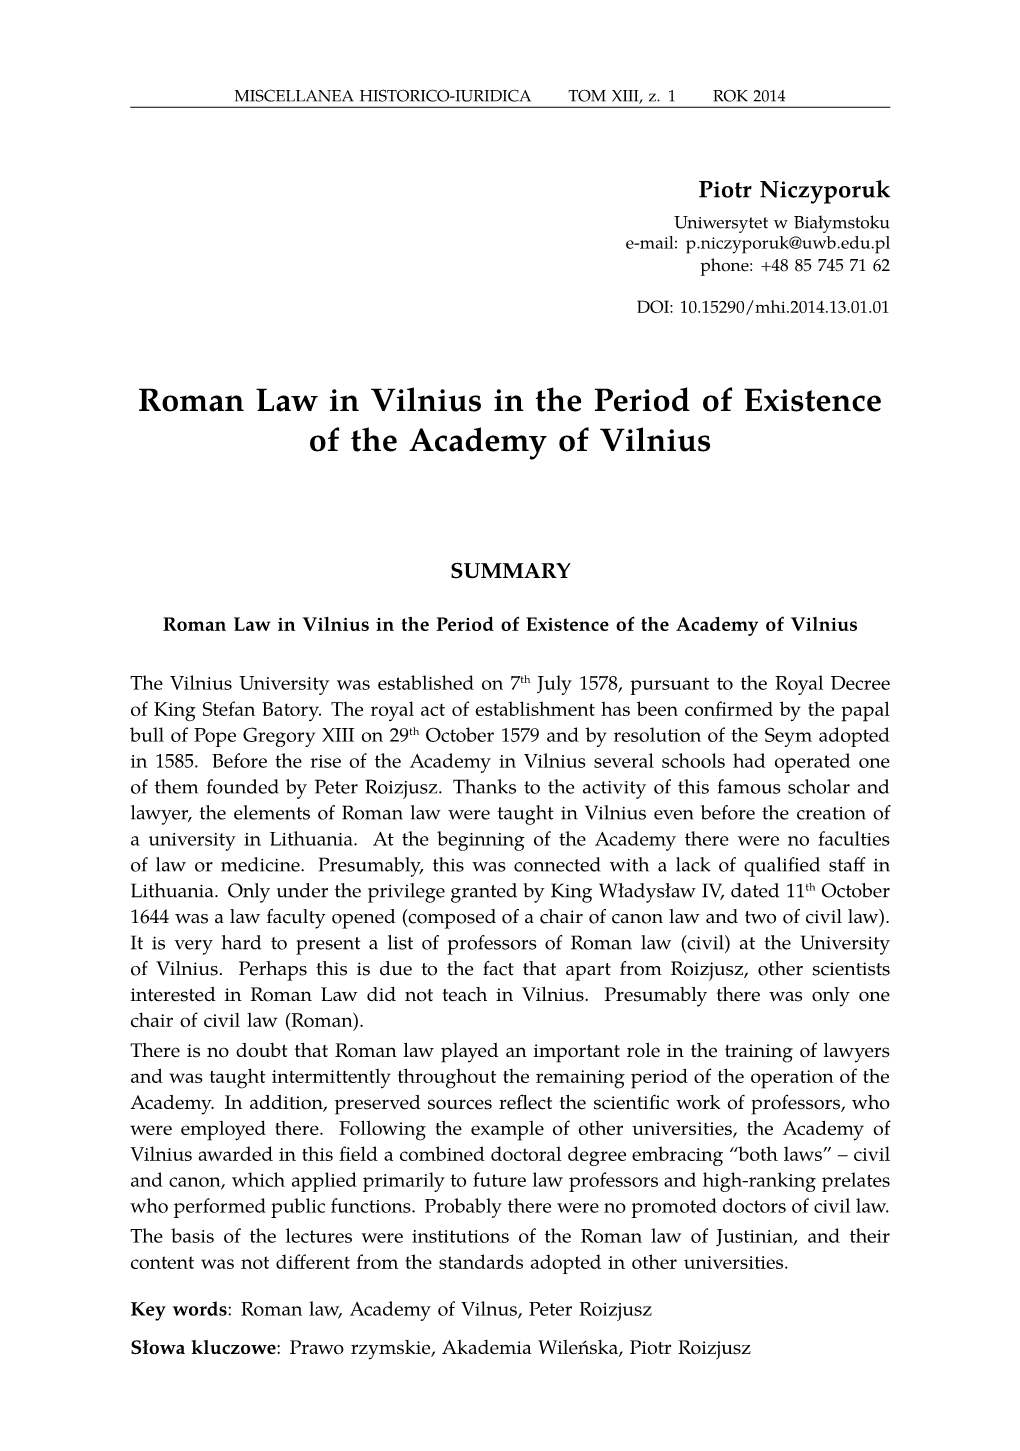 Roman Law in Vilnius in the Period of Existence of the Academy of Vilnius